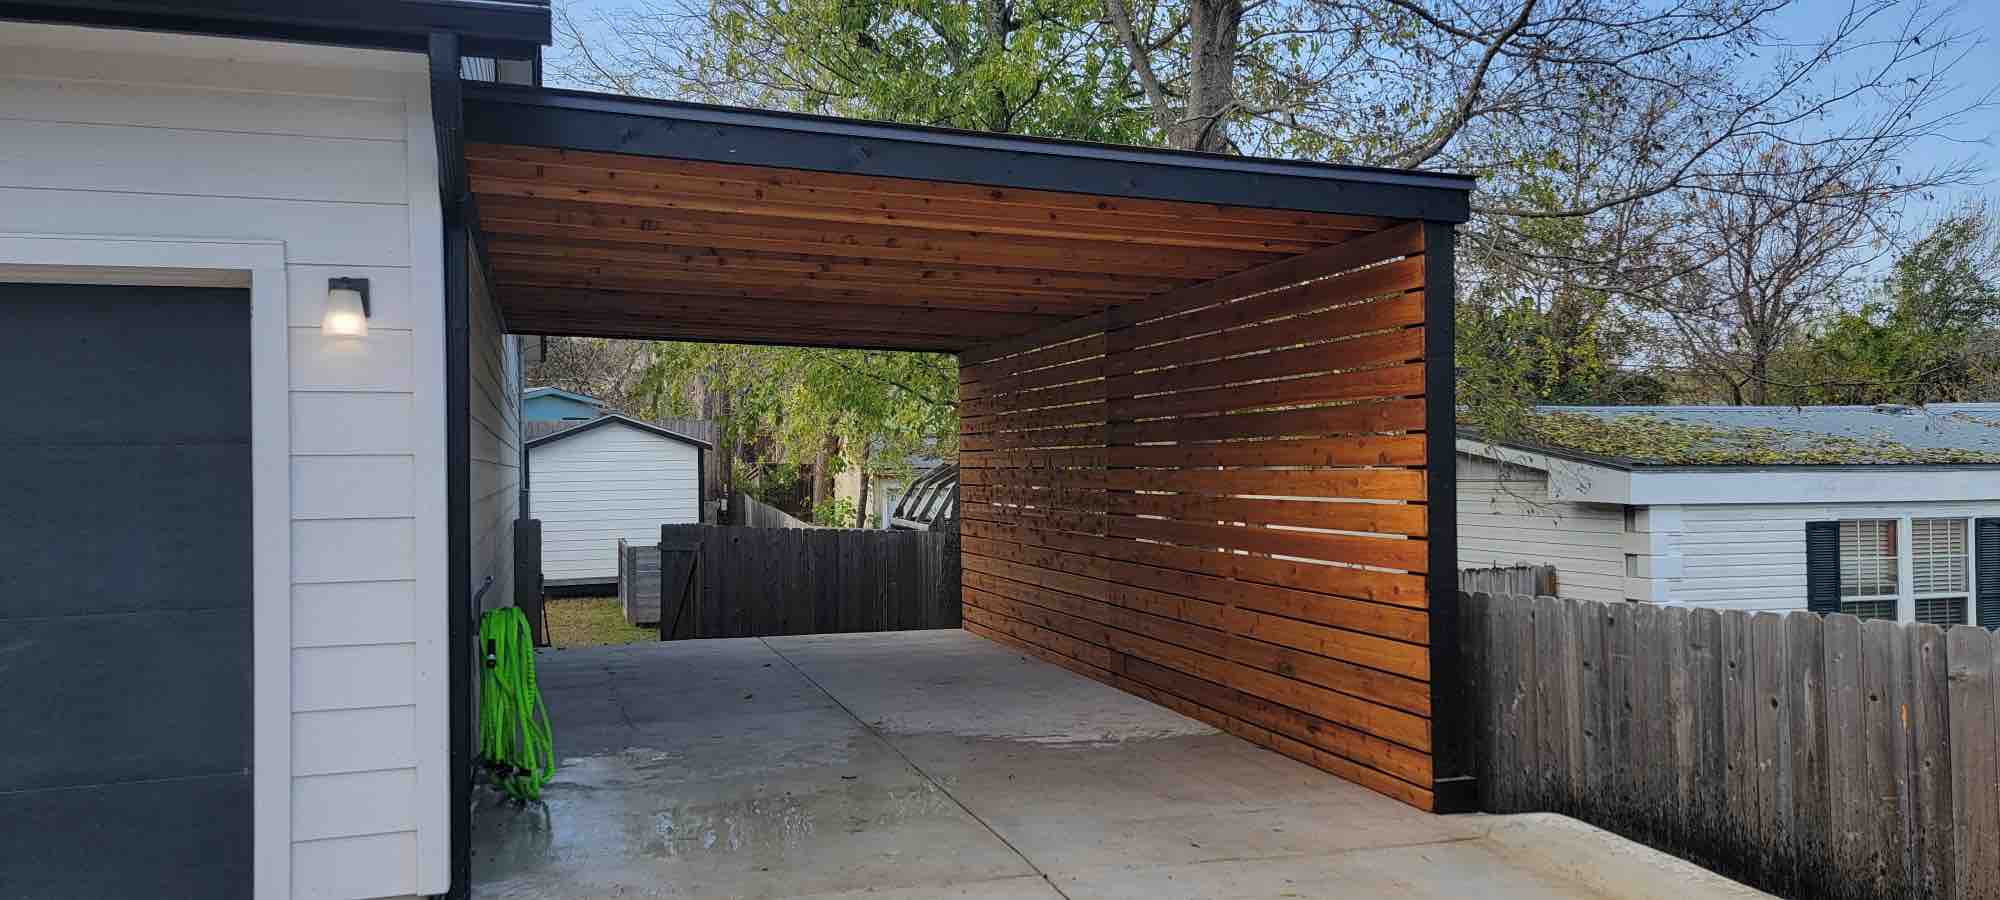 Carport with R Panel Metal Roof and Privacy Blind